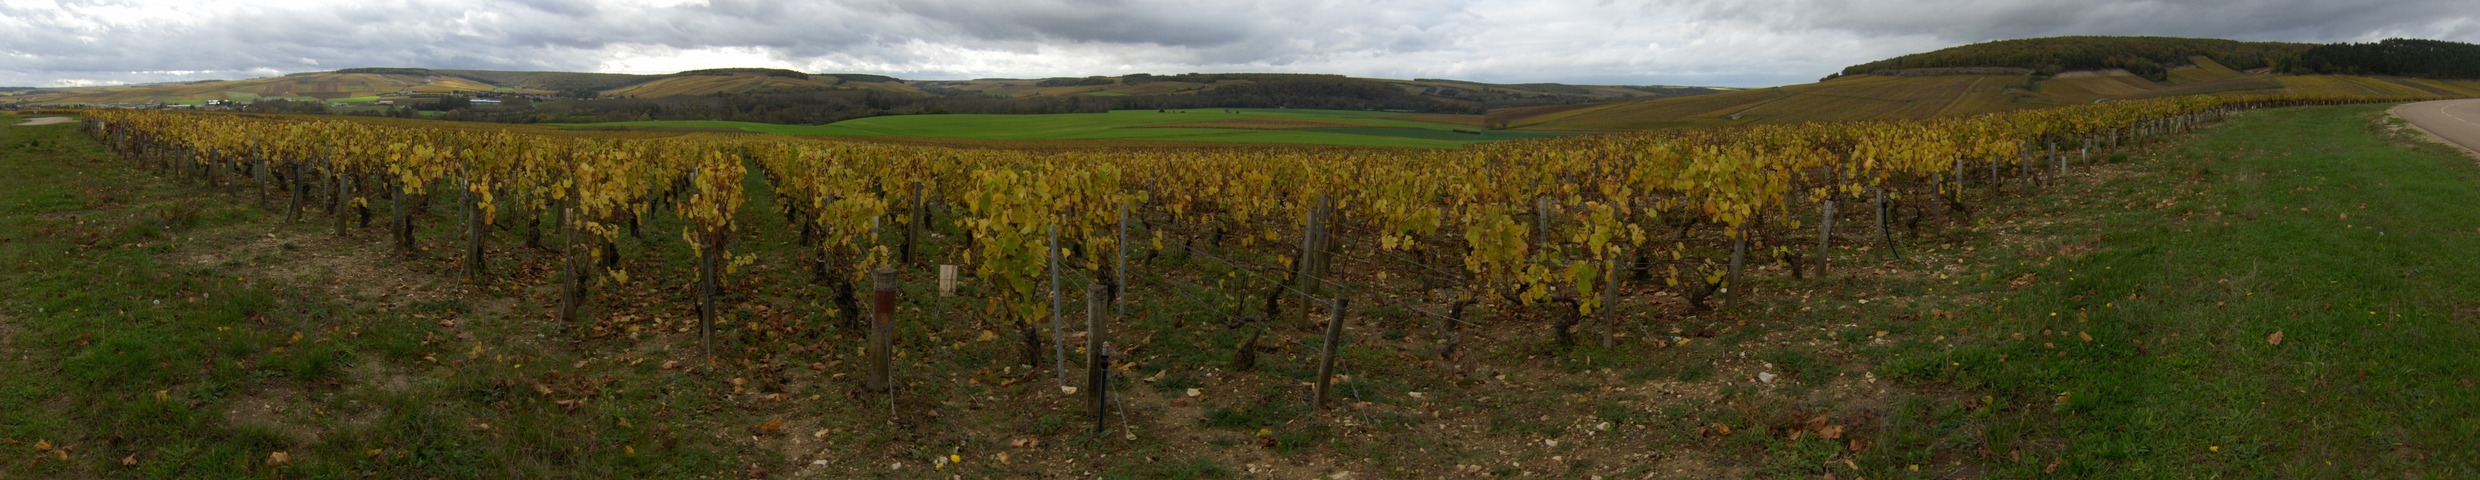 Vineyards at Chablis area not far from of CP